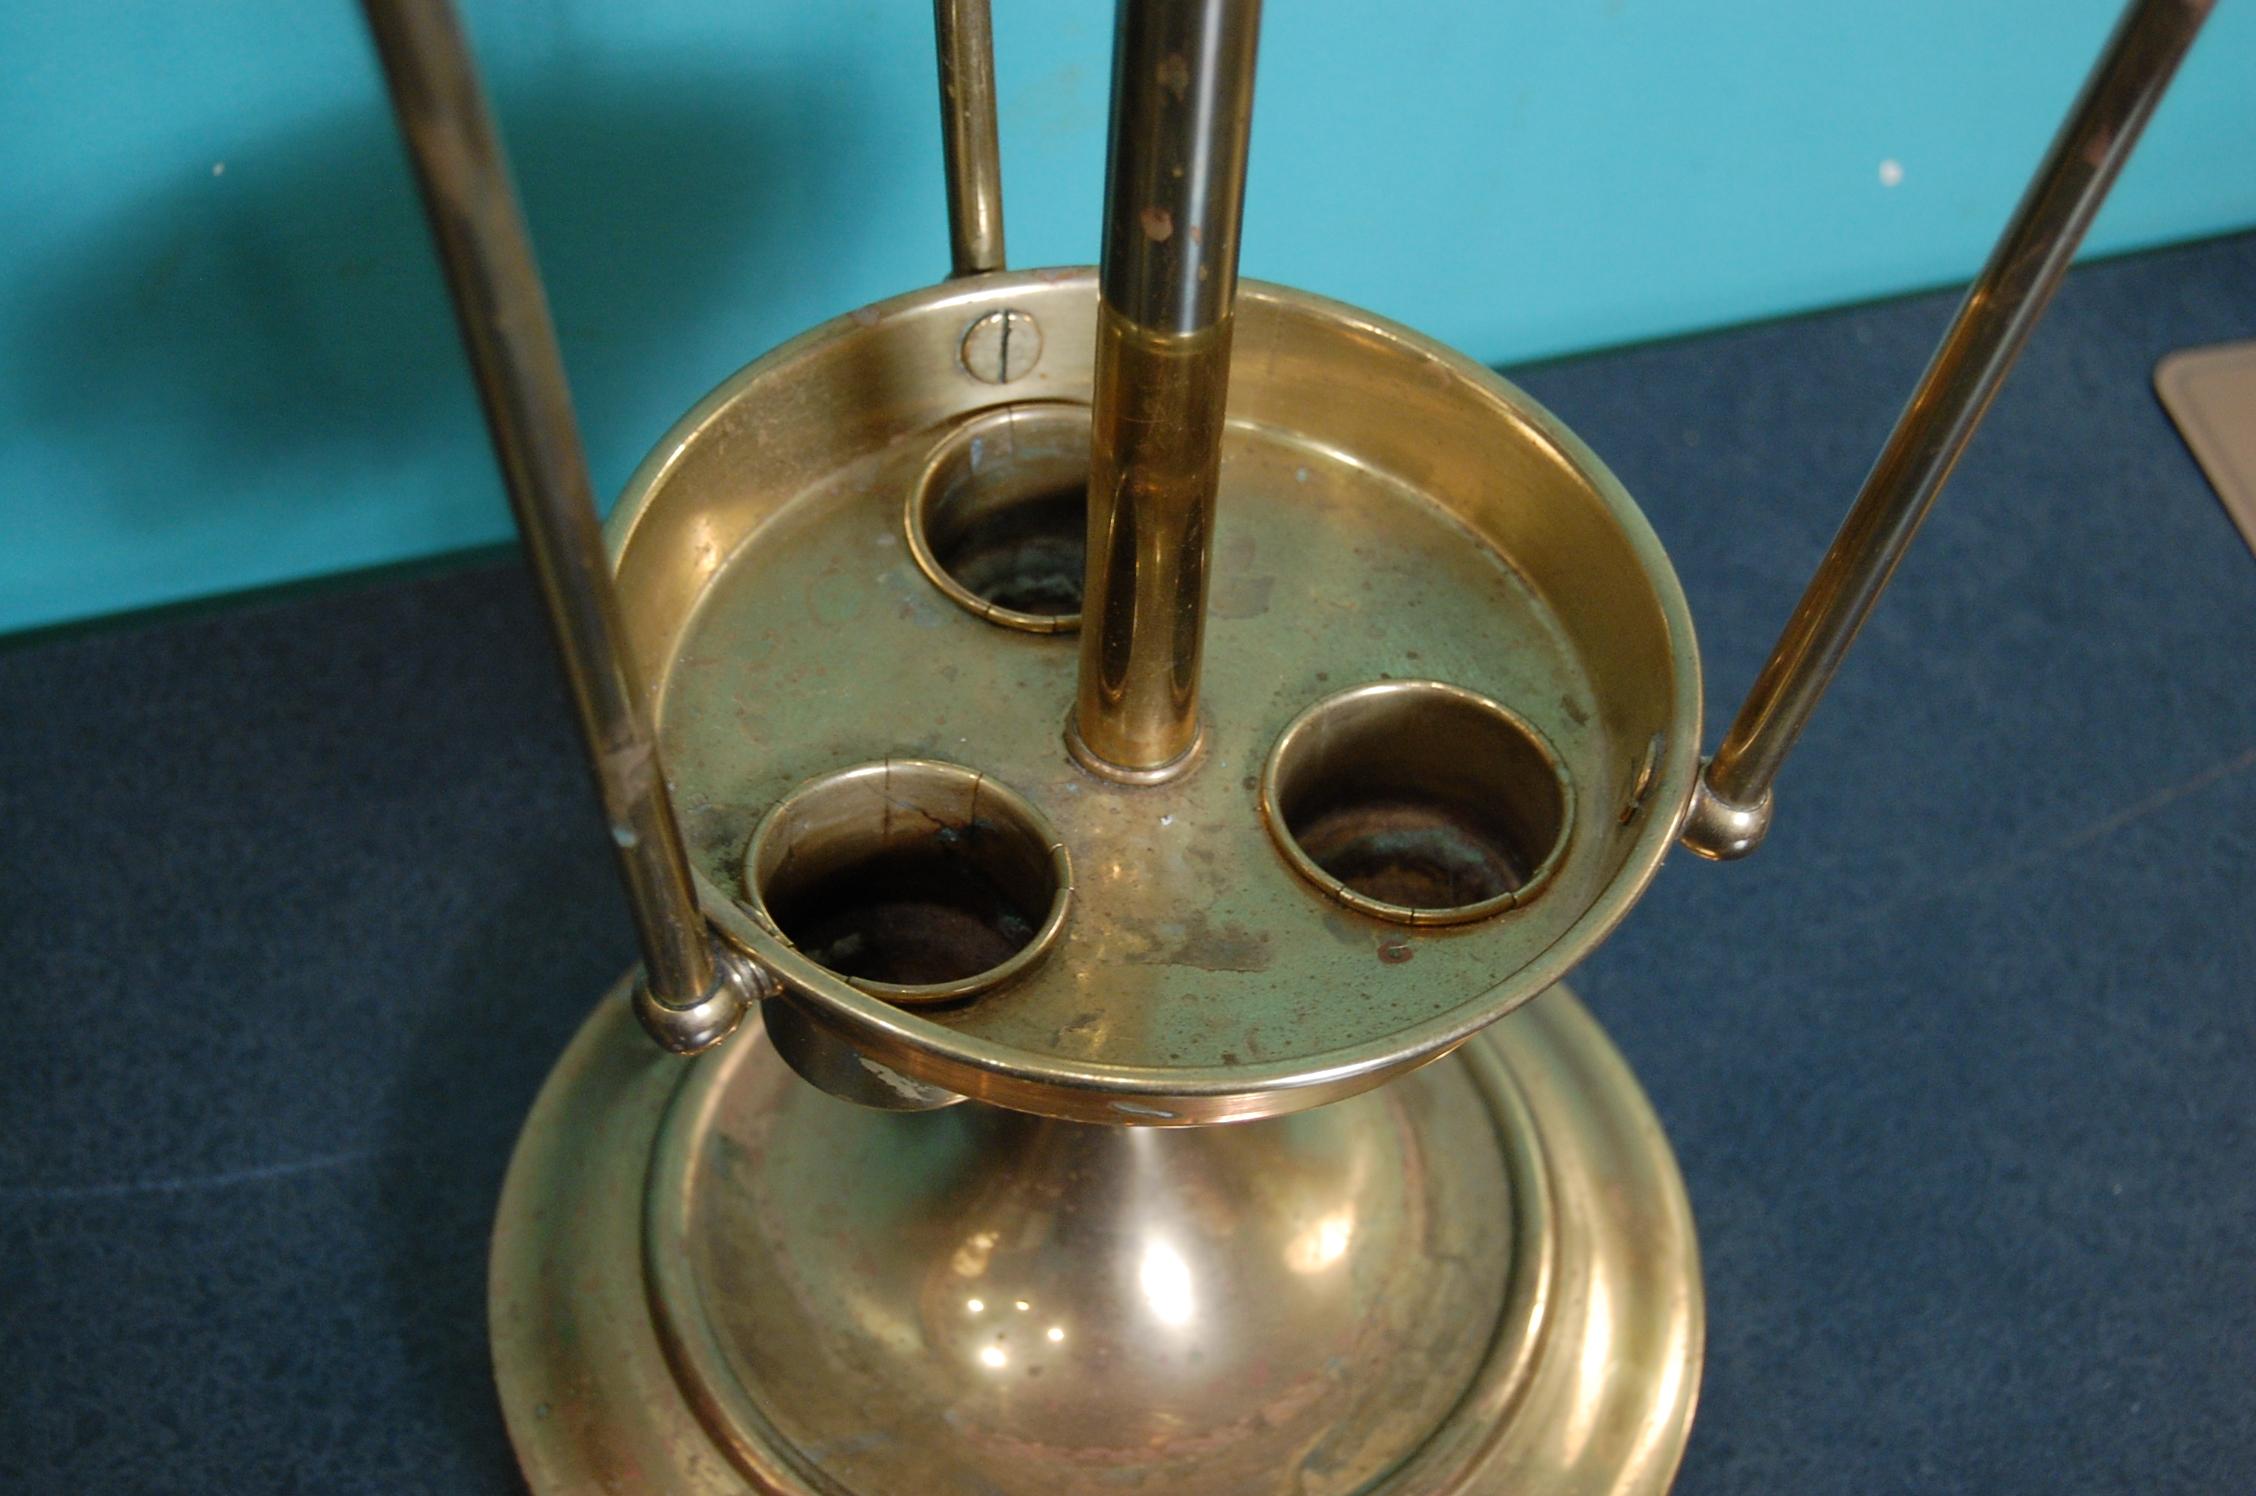 Mid-20th Century Brass Umbrella Stand by Herco Art Manufacturing Company For Sale 5